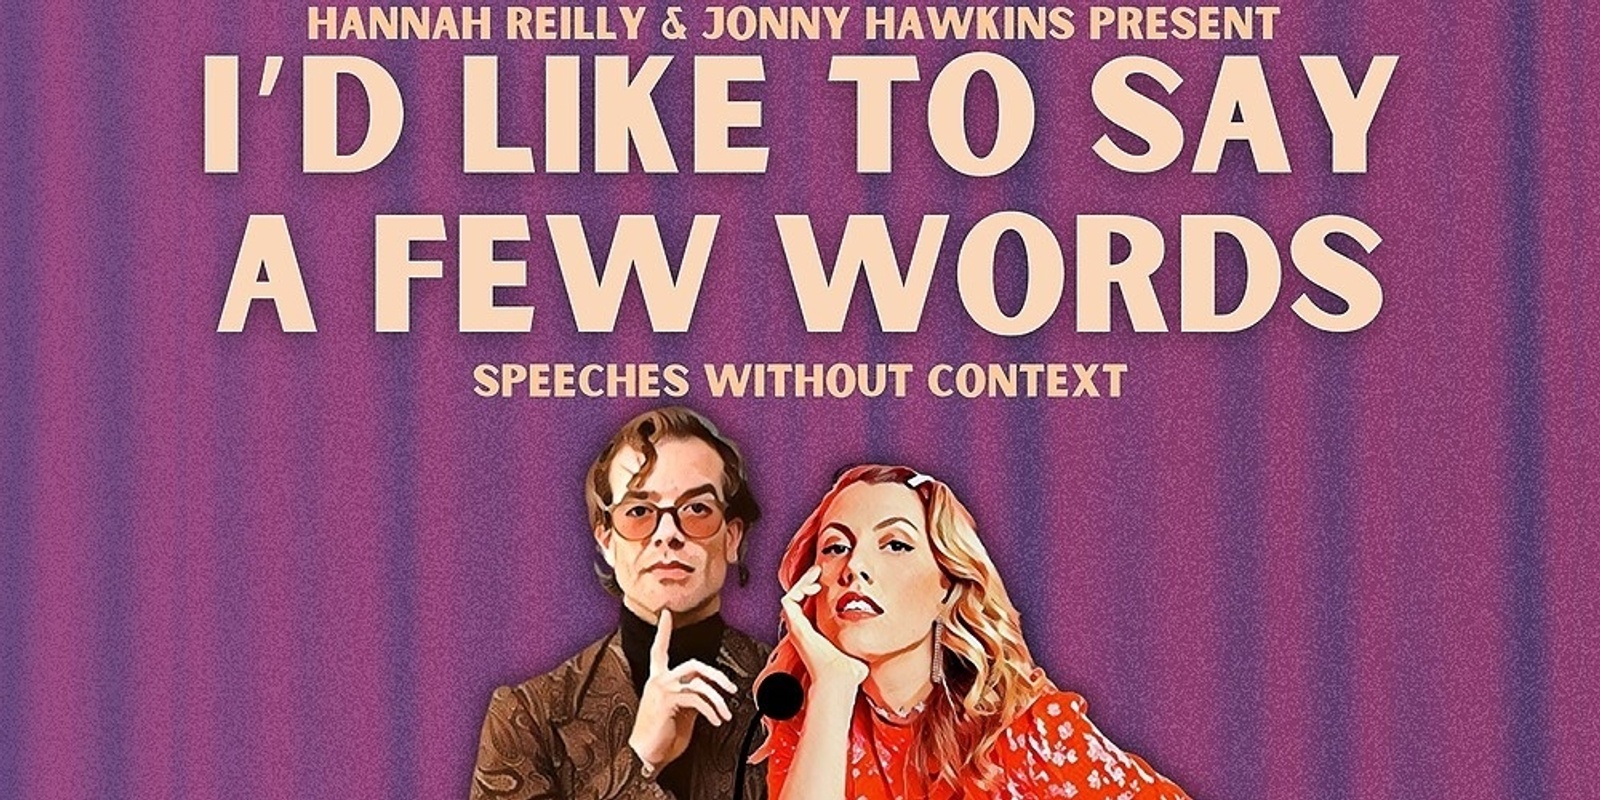 Banner image for HANNAH REILLY & JONNY HAWKINS PRESENT: I'D LIKE TO SAY A FEW WORDS